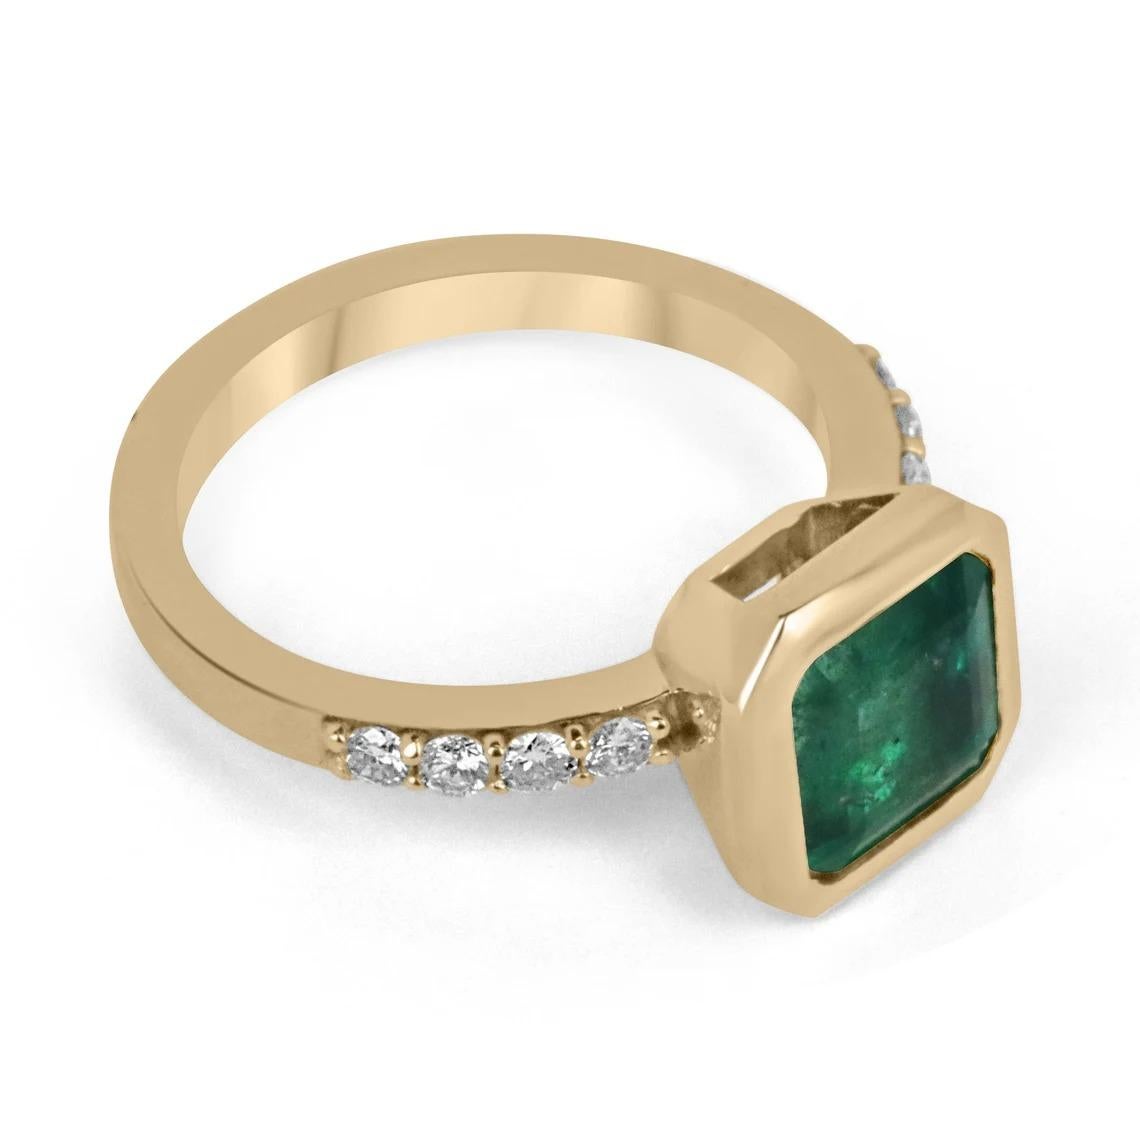 A remarkable emerald and diamond solitaire with accents engagement or right-hand ring. The center stone showcases a natural emerald with lush dark green color and good clarity. Minor natural internal inclusions are common in all earth-mined gems and